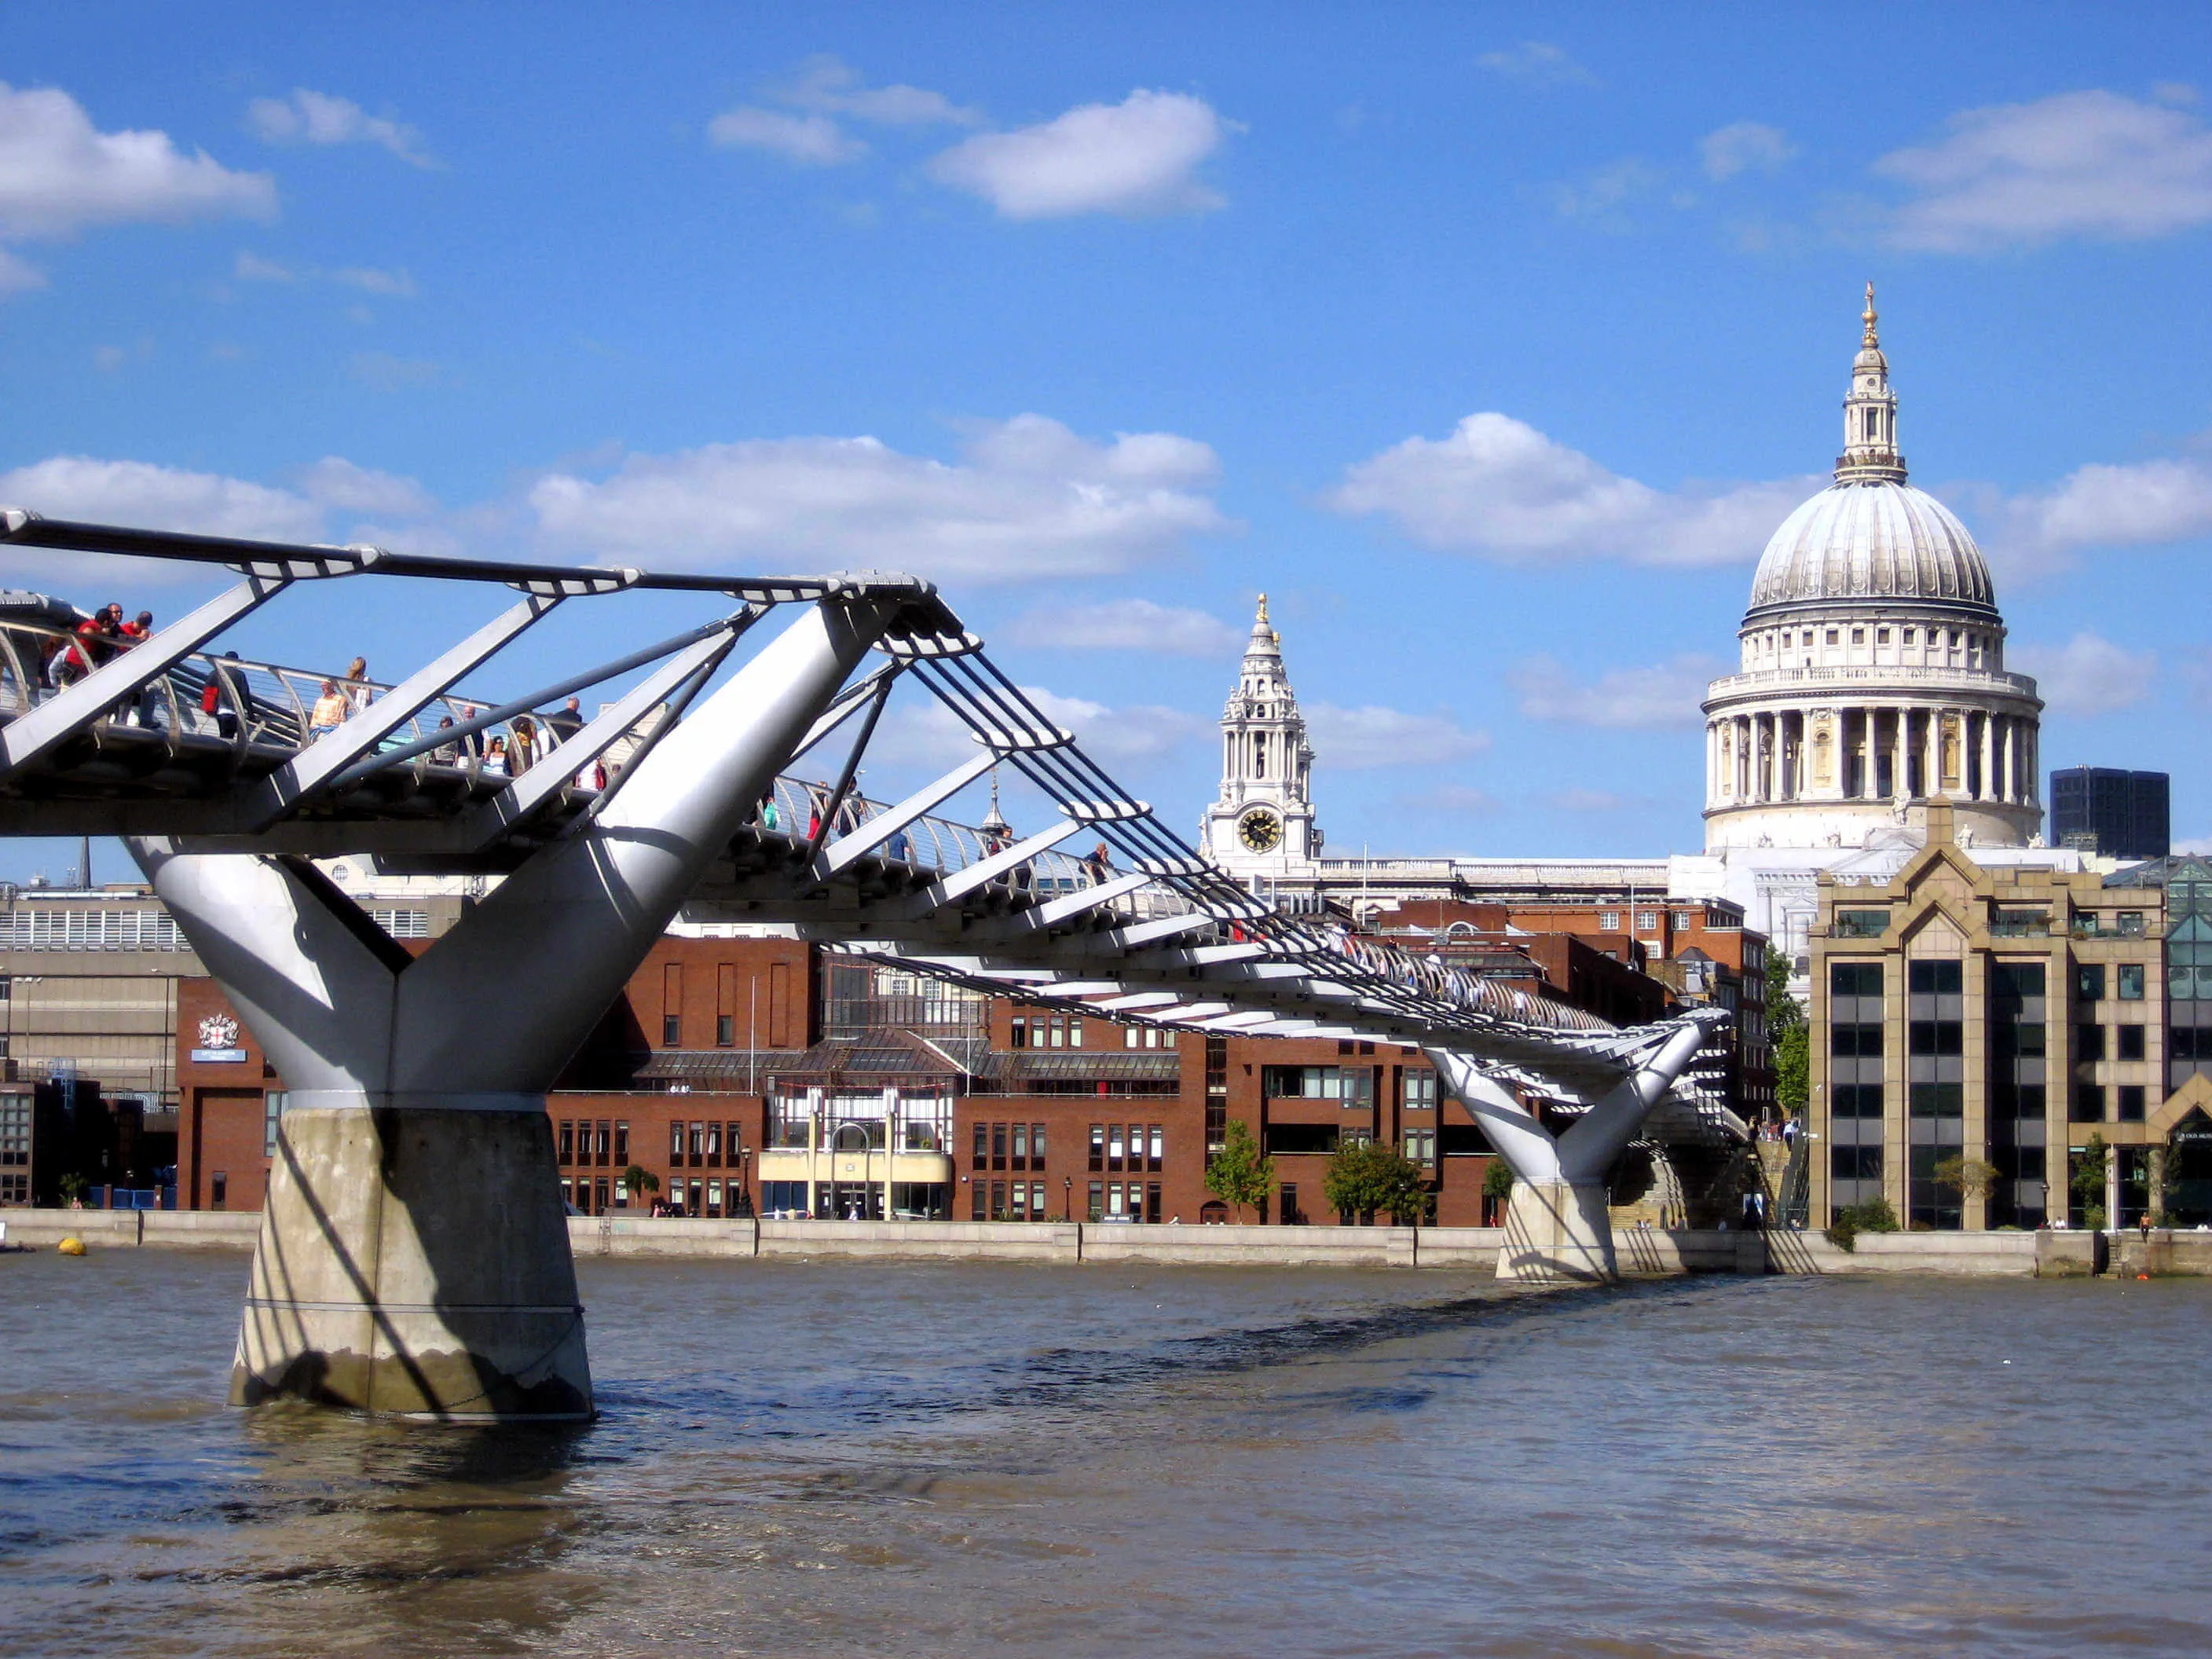 The pedestrian-only Millennium Bridge leads over the Thames to St. Paul's Cathedral